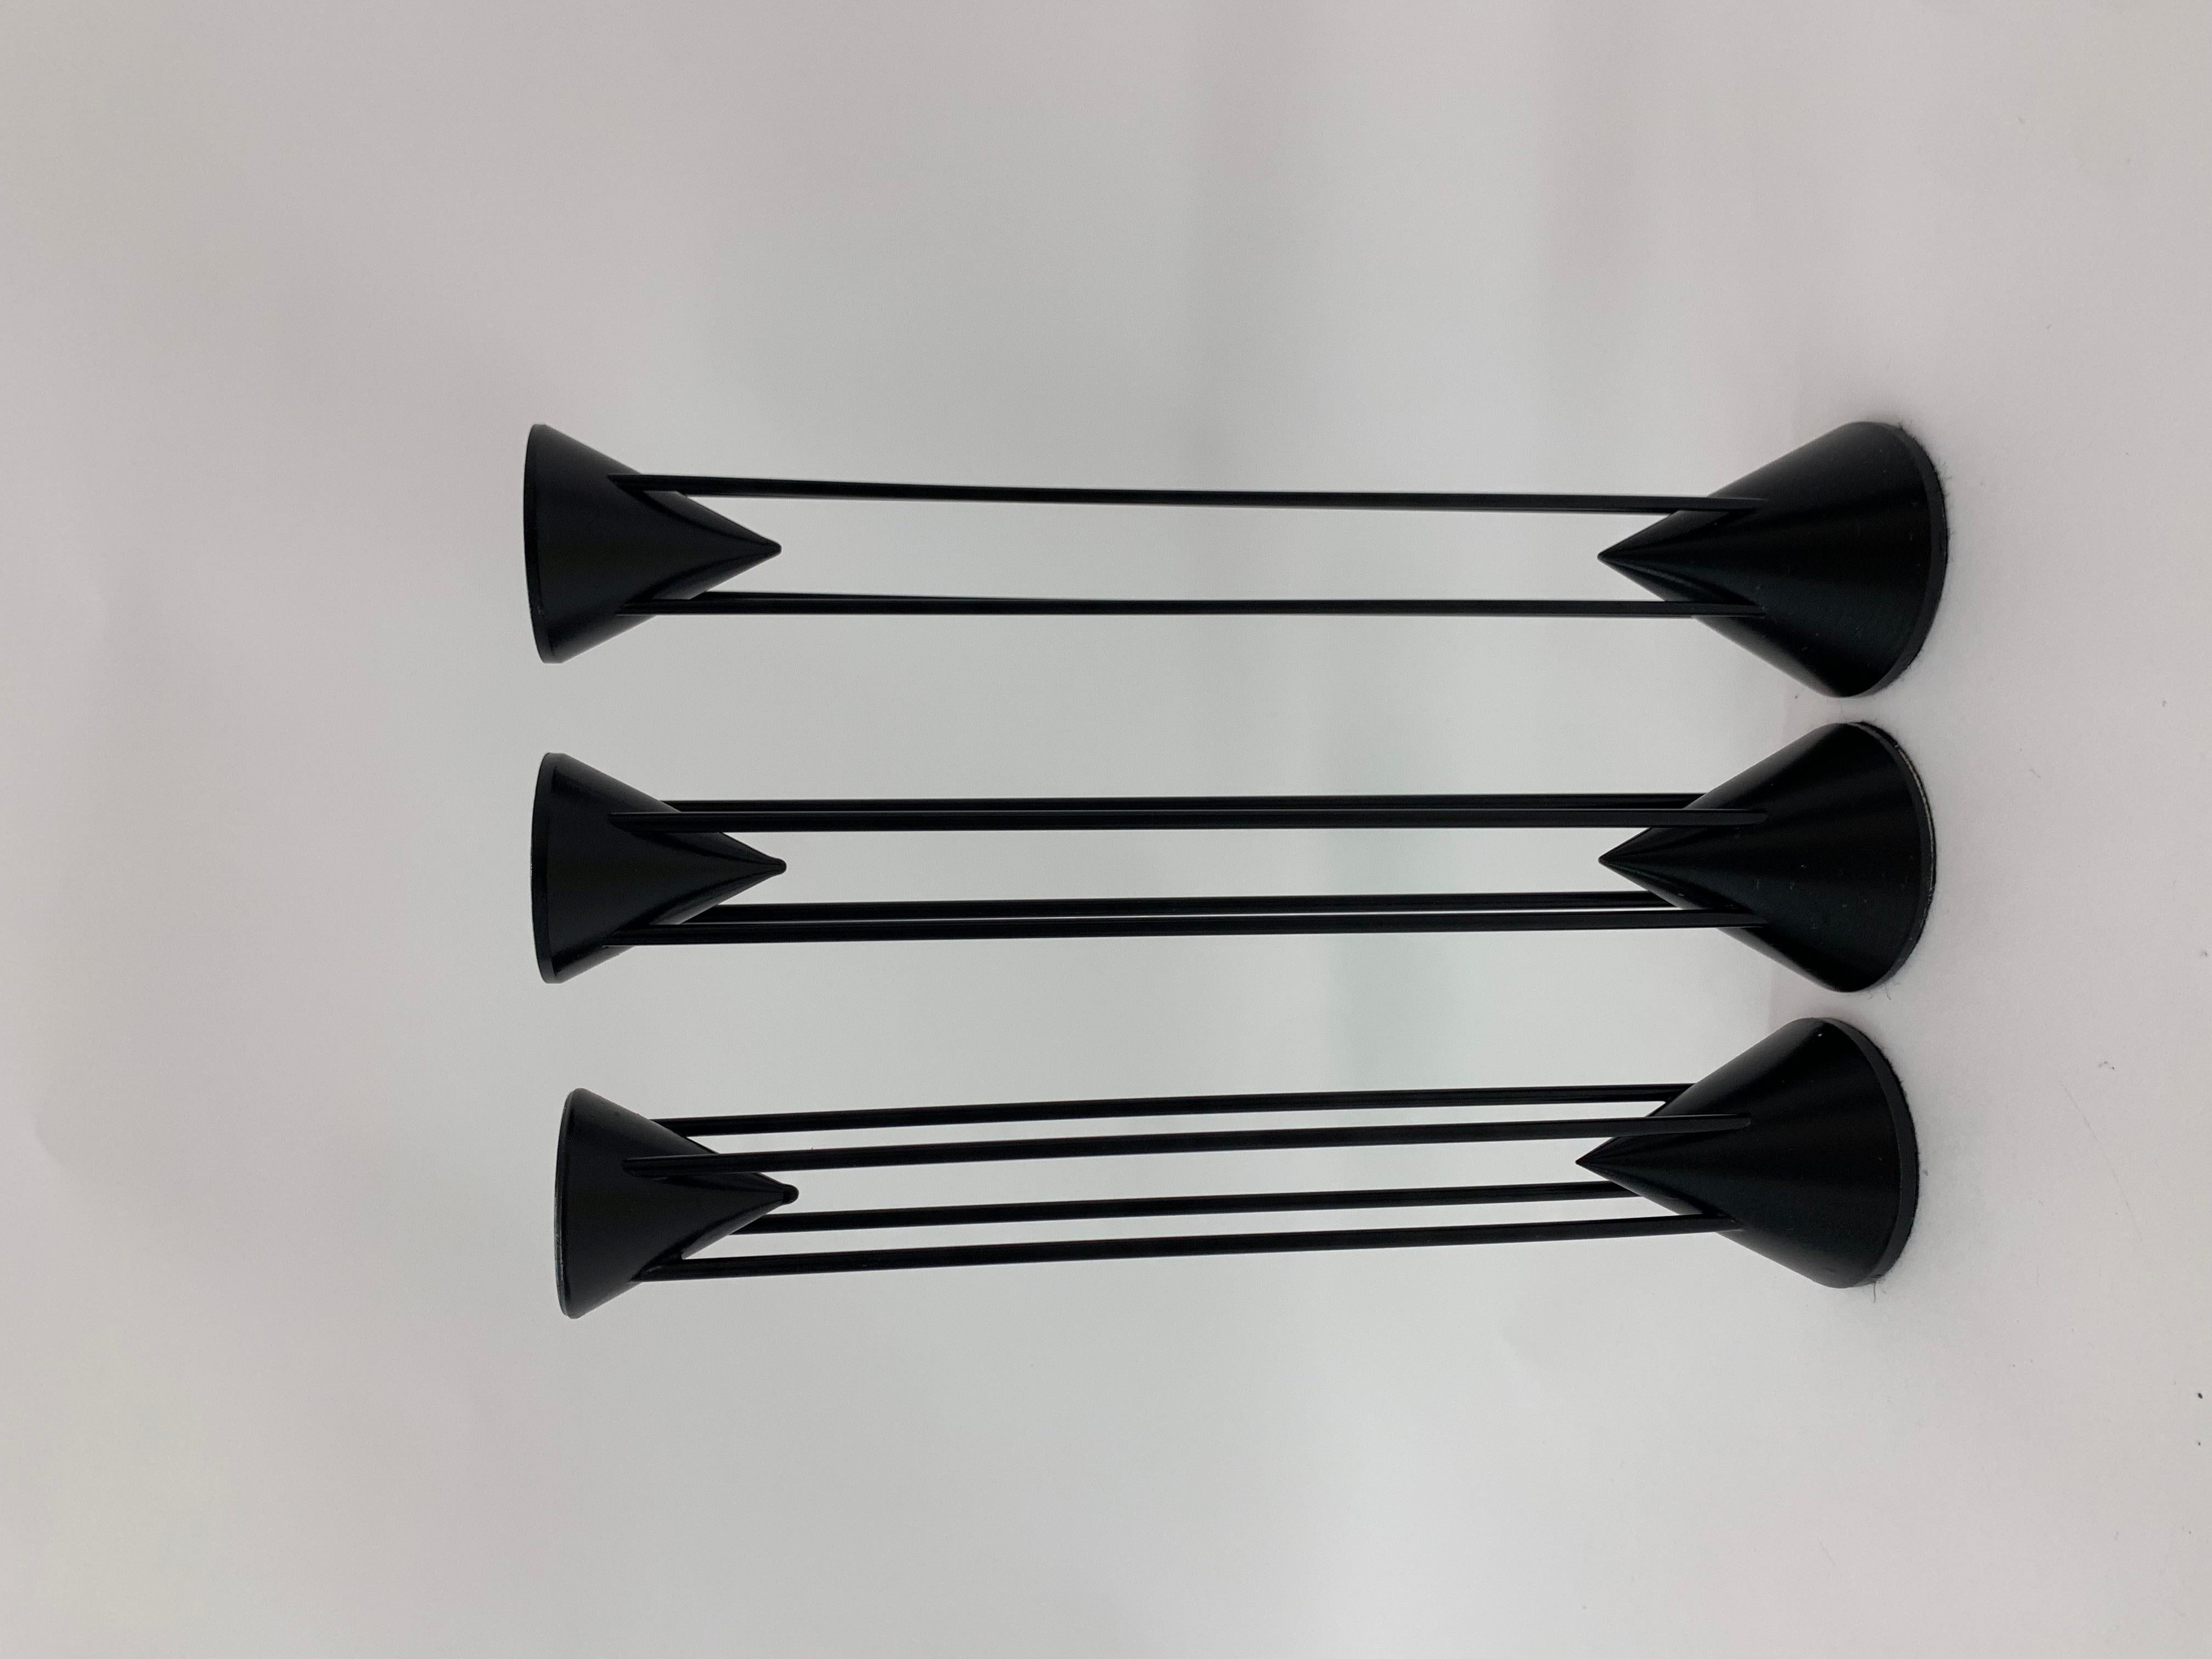 Set of 3 Post-Modern Memphis candle sticks by Markus Borgens, 1980s.